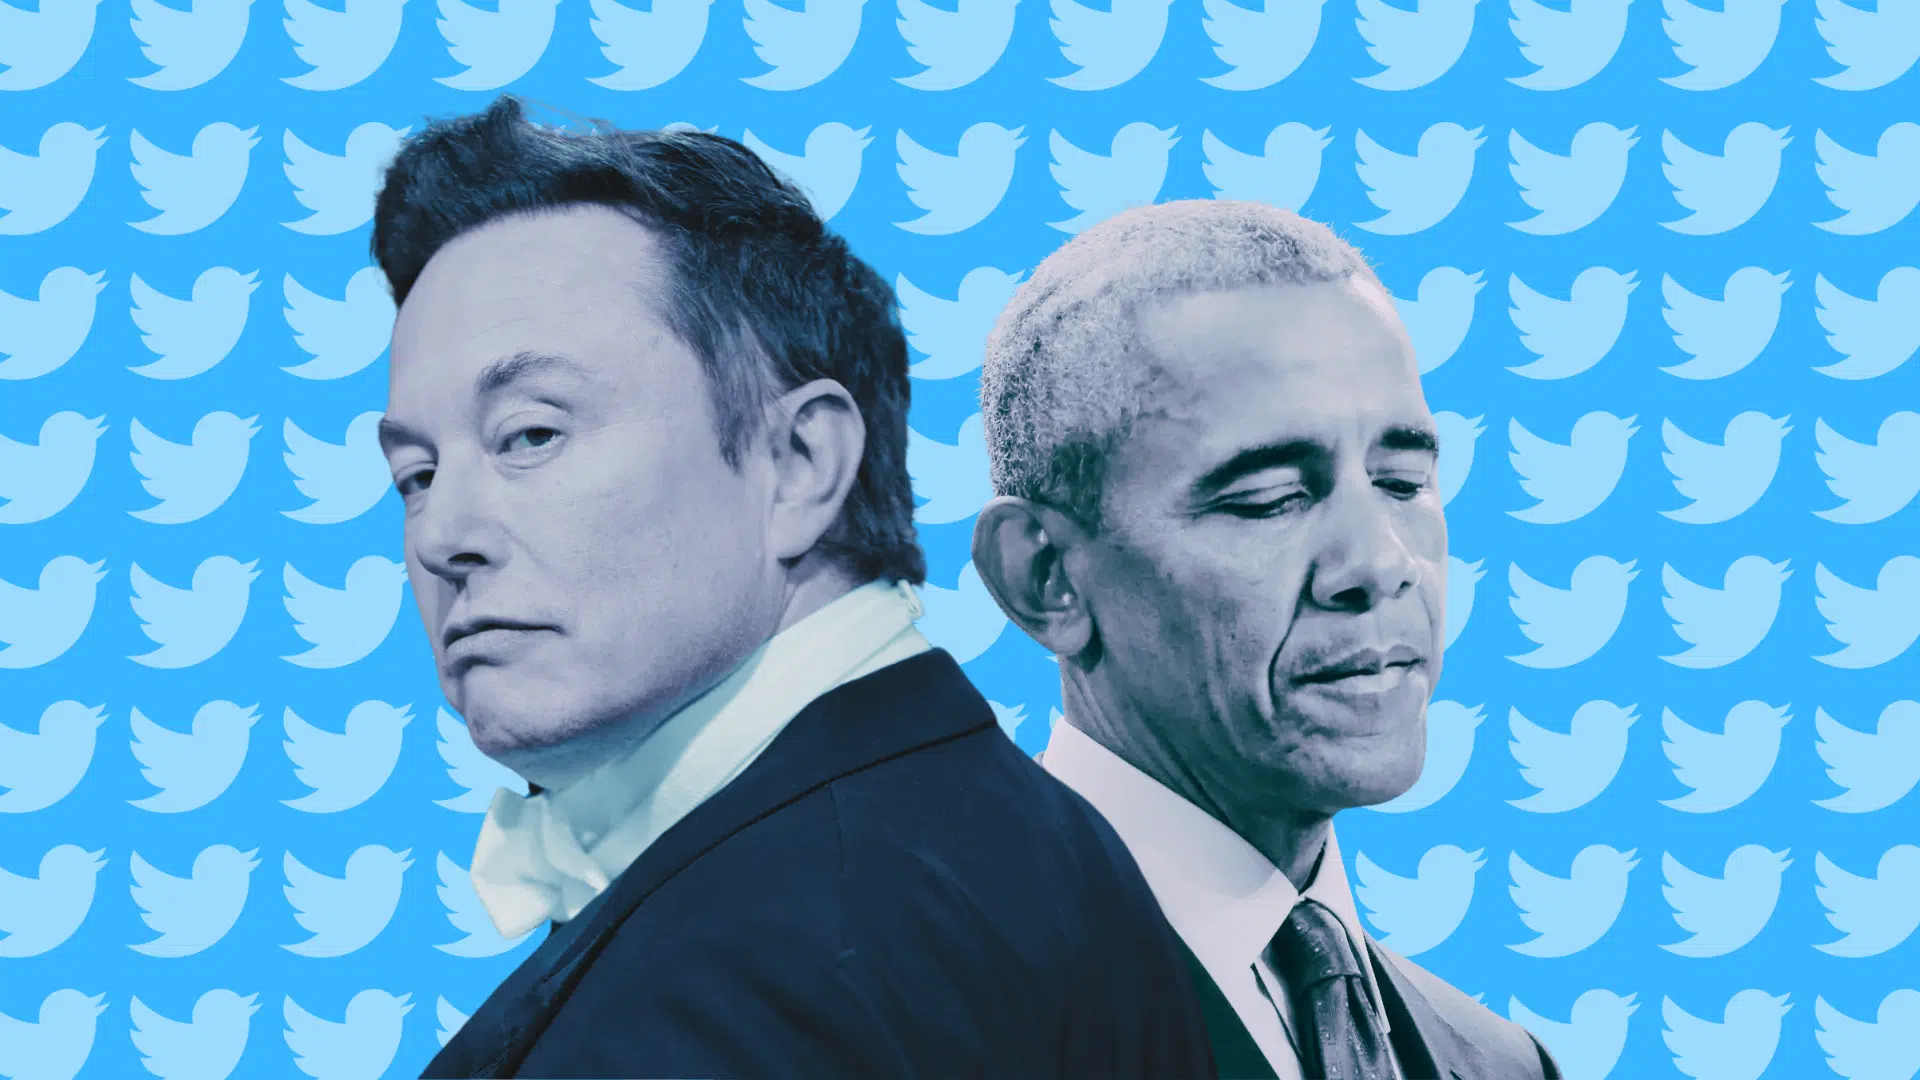 Musk overtook Obama to become the most followed on Twitter